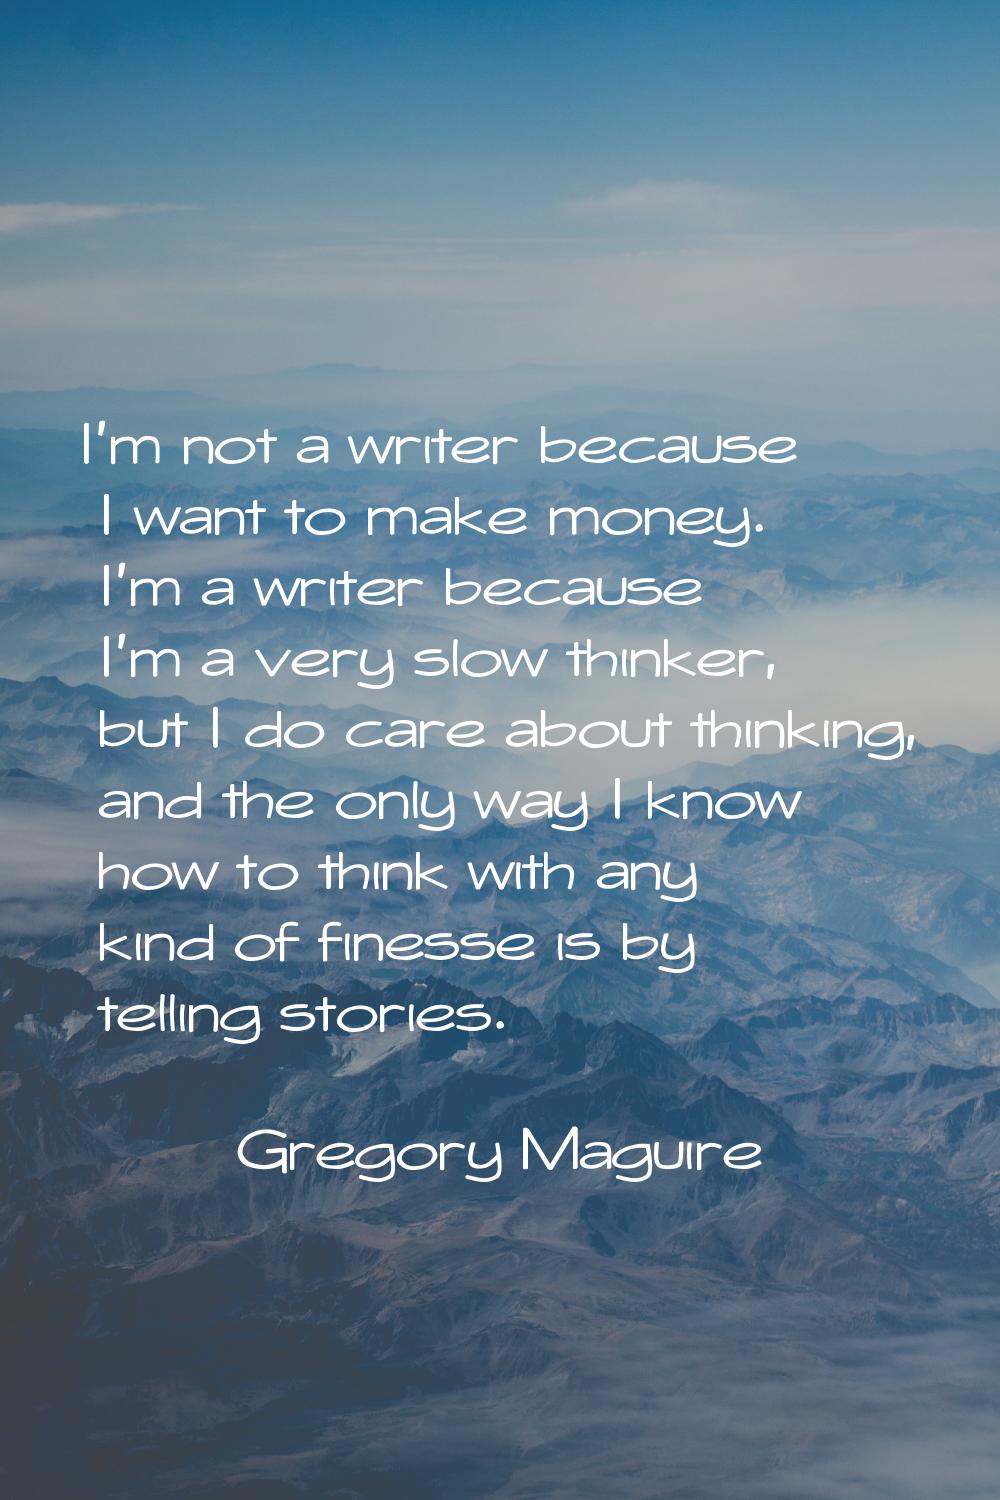 I'm not a writer because I want to make money. I'm a writer because I'm a very slow thinker, but I 